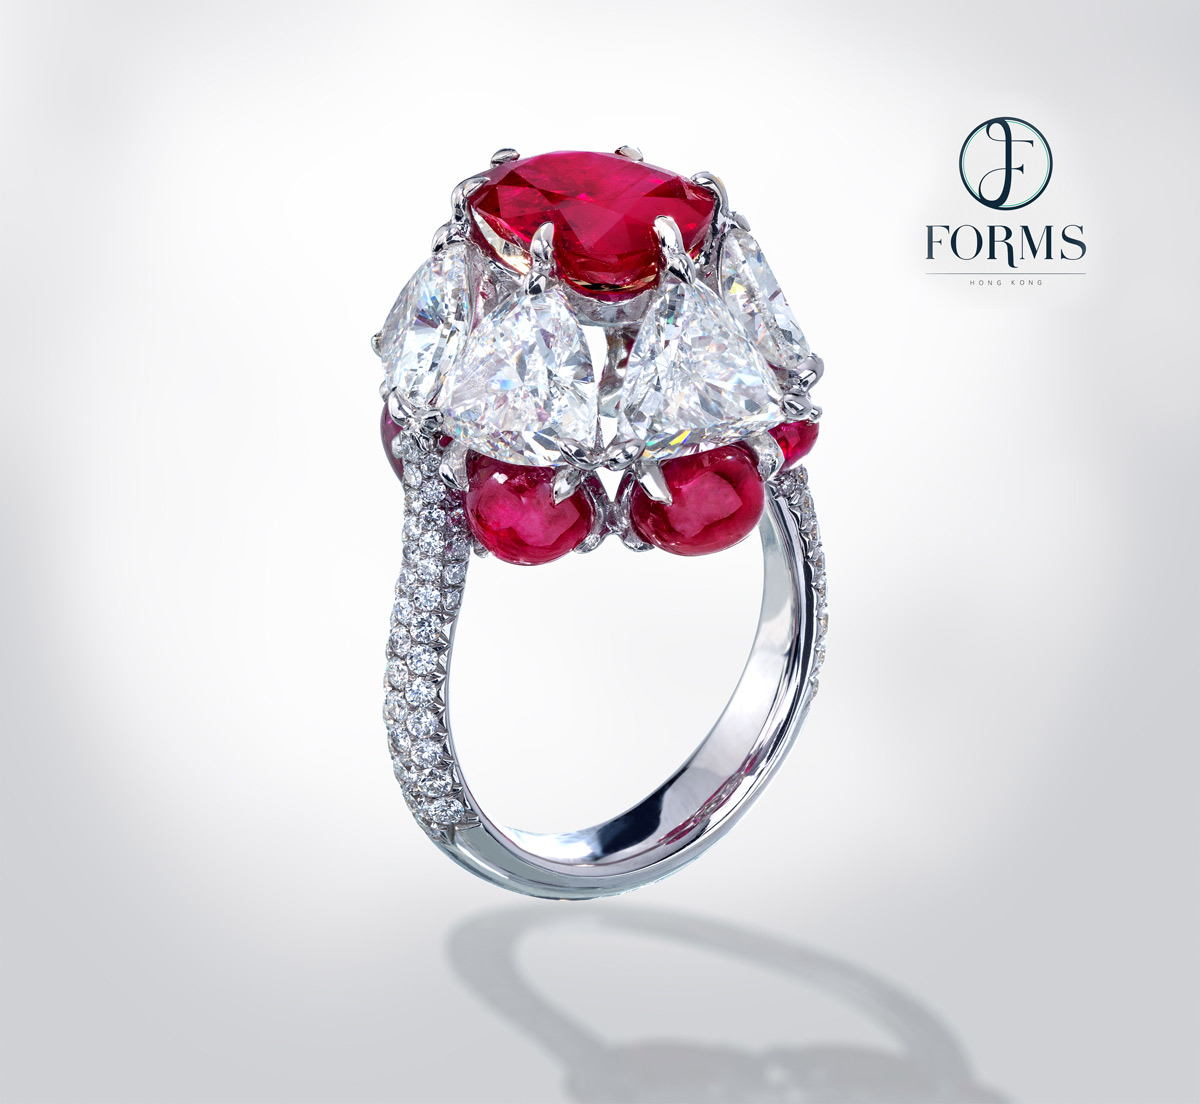 Forms Jewellery, Hong Kong. A ring featuring a 3.85ct ruby from Mogok set with with 6 triangle shaped diamonds each weighing over 1ct and 6 Burmese ruby cabochons over 1ct each